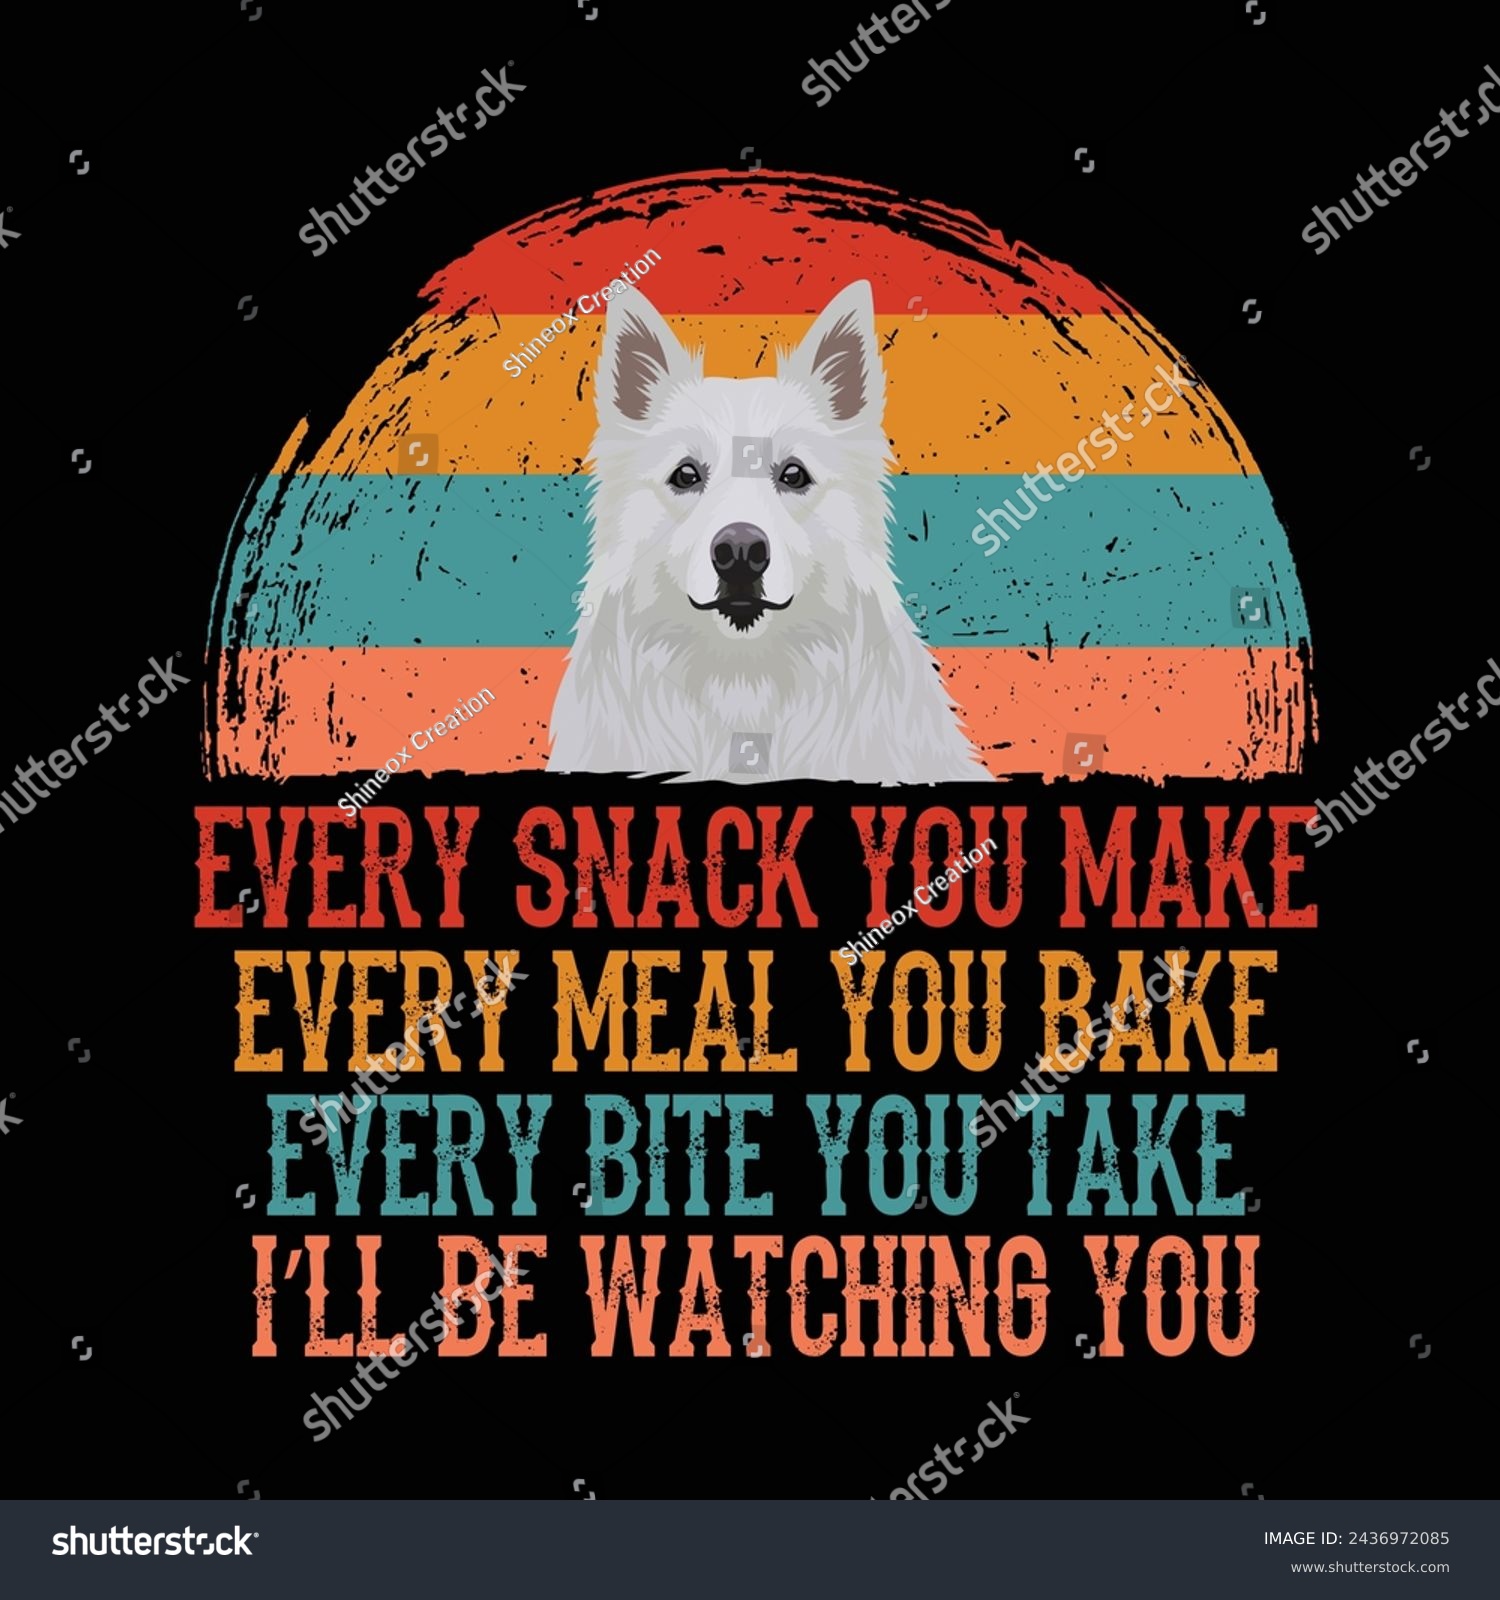 SVG of Every snack you make Every meal you bake Every bite you take I'll Be Watching You American Eskimo Dog Typography t-shirt Design Vector svg